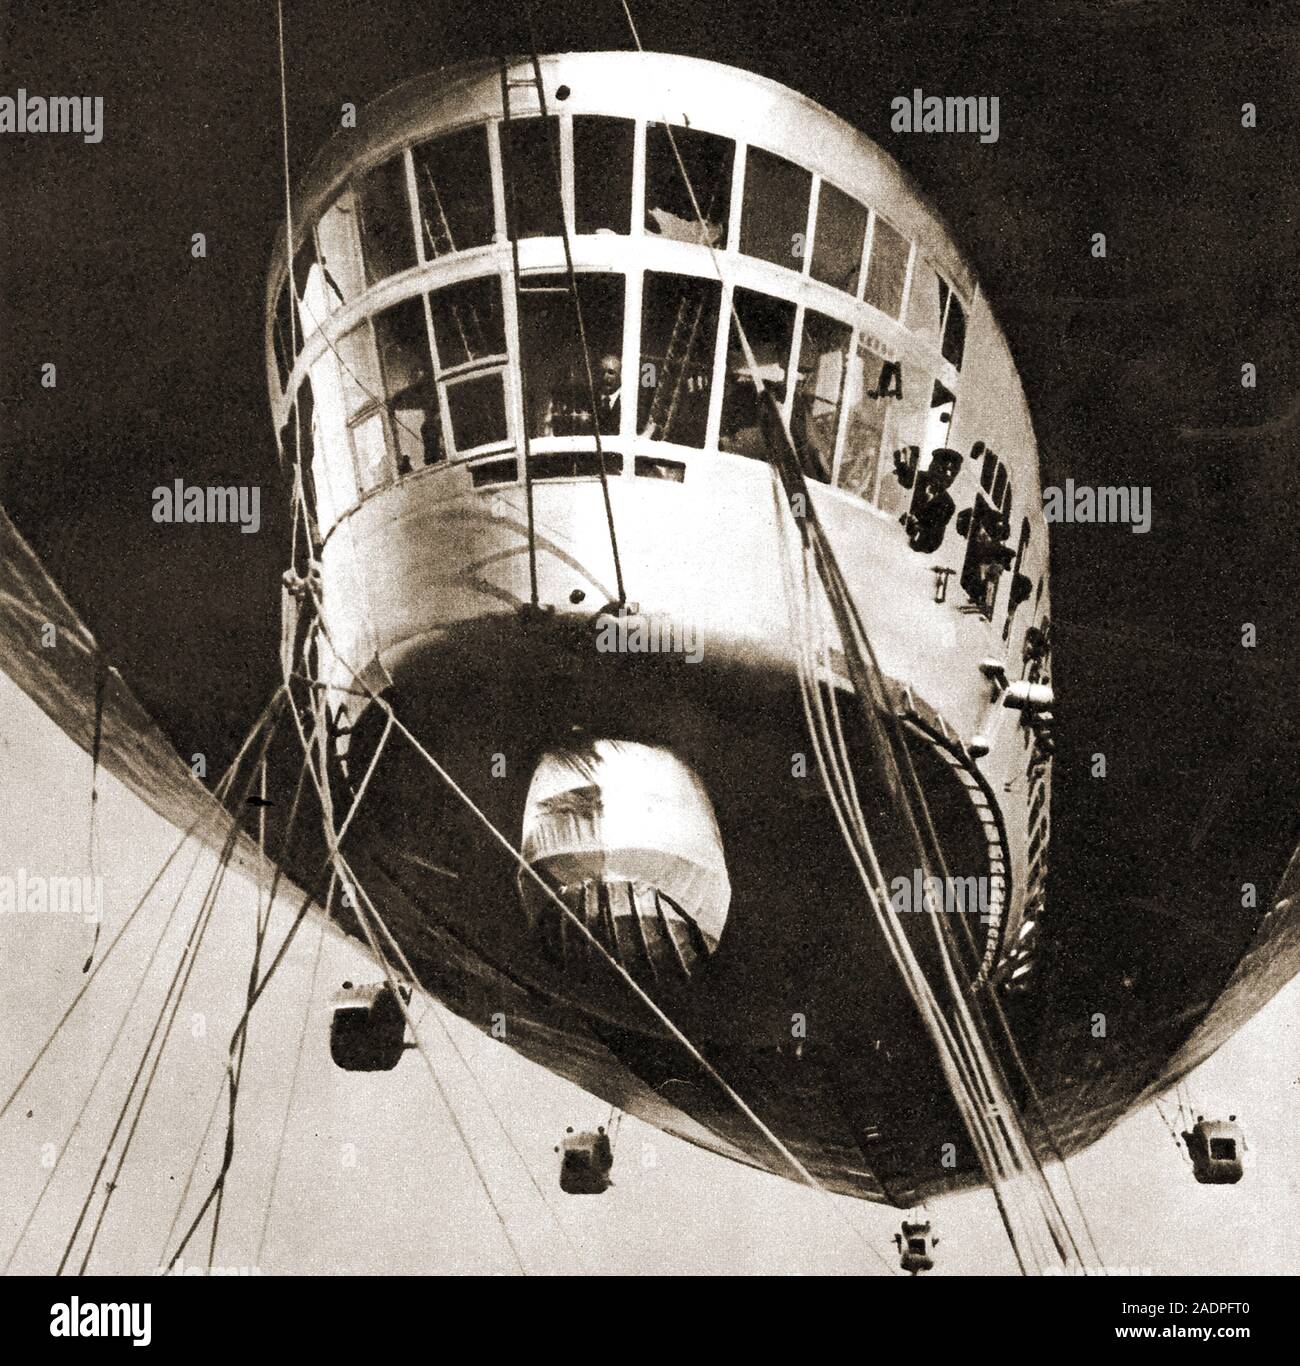 An historic photograph of the graph zeppelin showing the pilot at  the controls and passengers and crew looking out of the windows. It was propelled  by five Maybach engines. 772 feet long, 100ft wide, 107 tons displacement. It flew around the world in 1929. Stock Photo